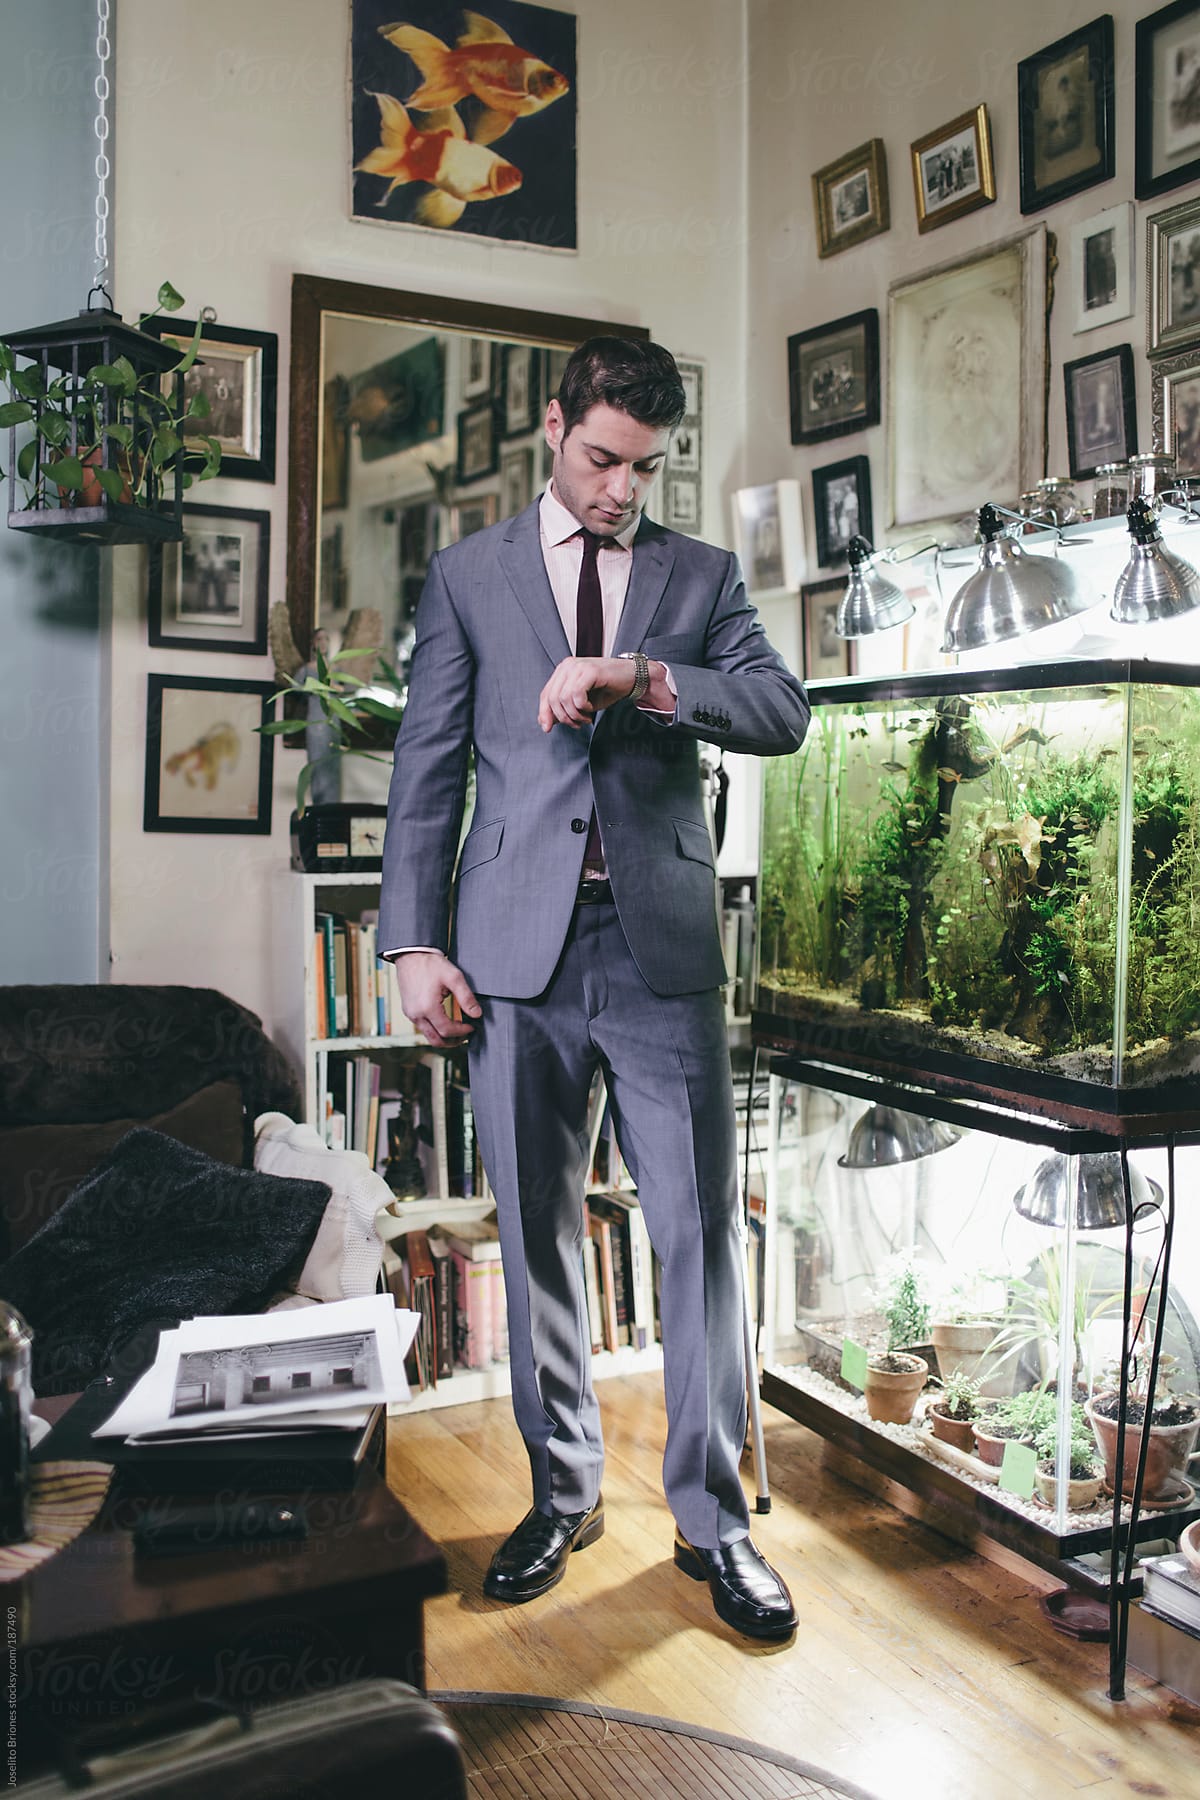 Portrait of a Man in Suit at Home in his Living Room next to Fish Tank